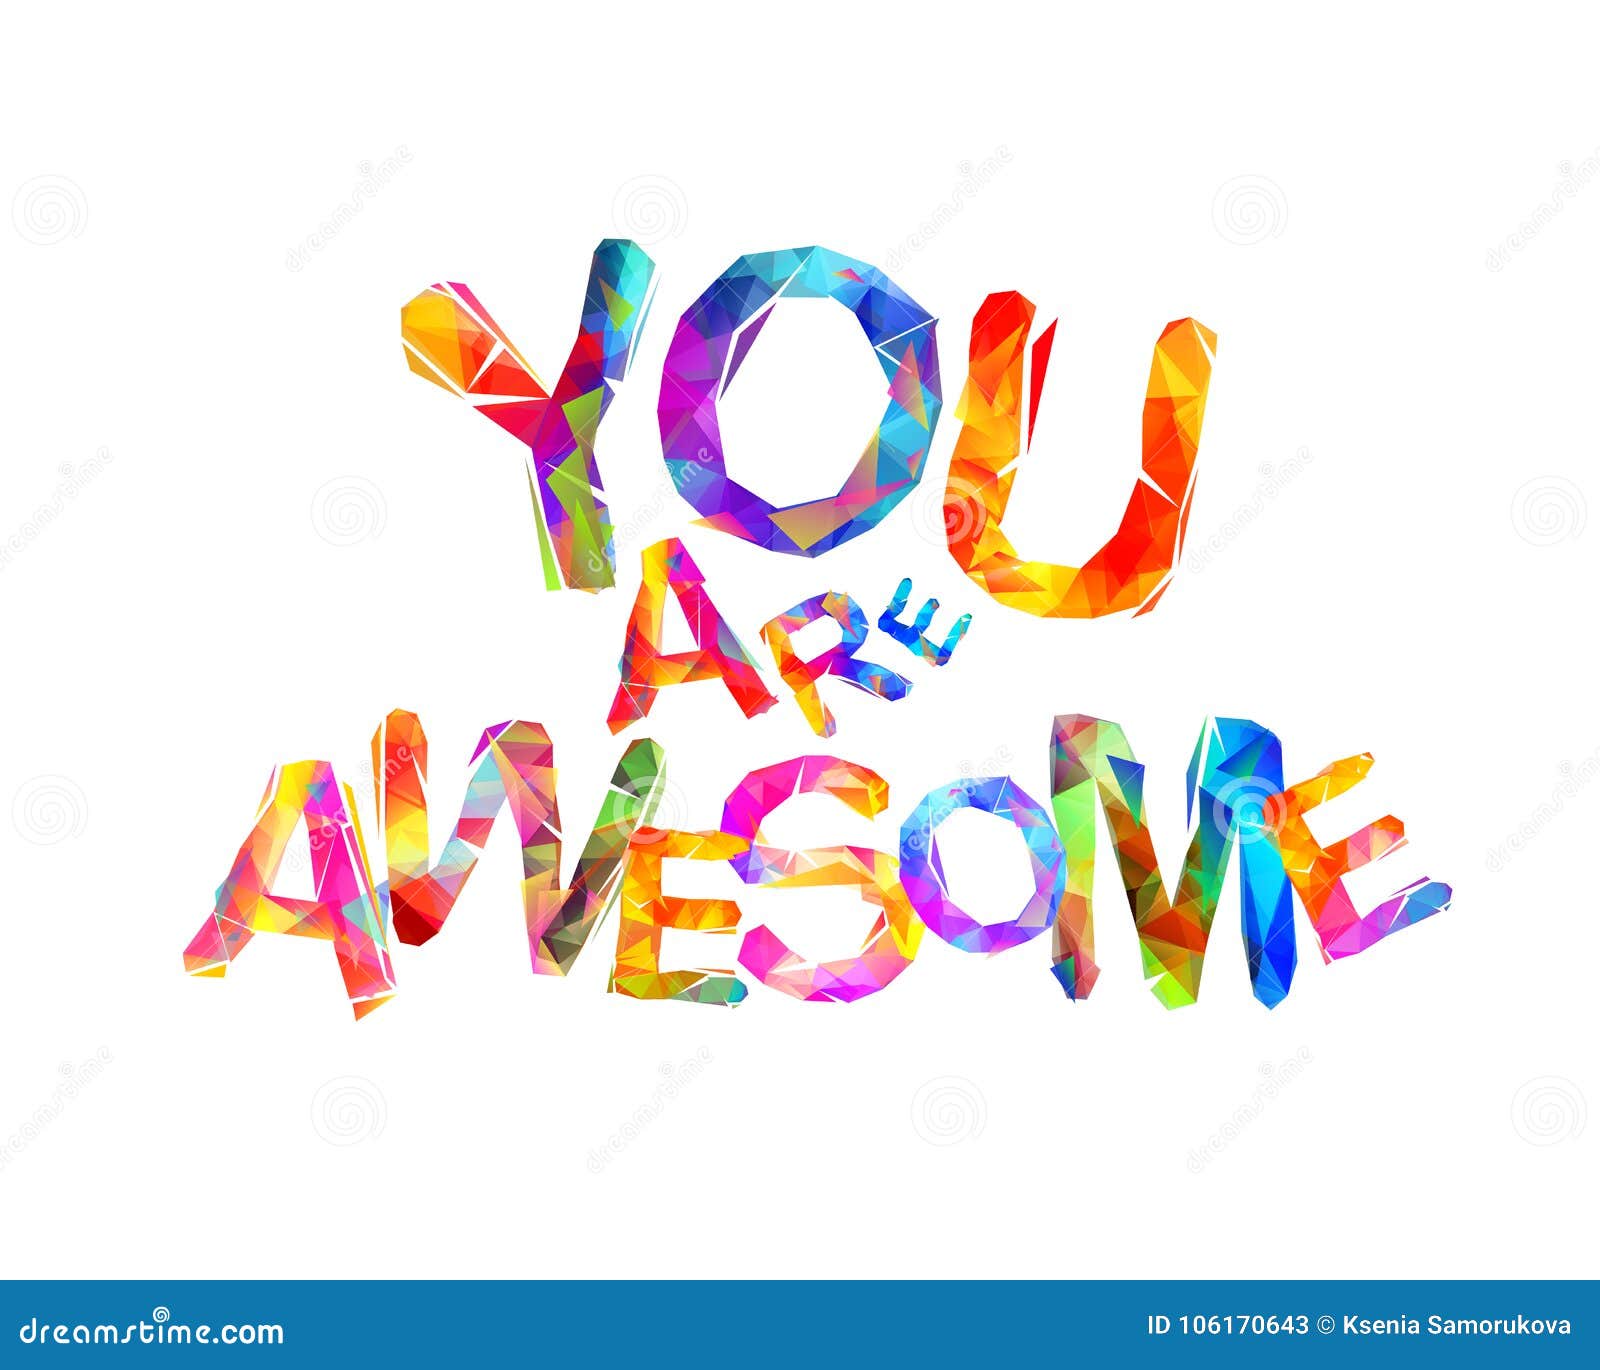 you are awesome. triangular letters